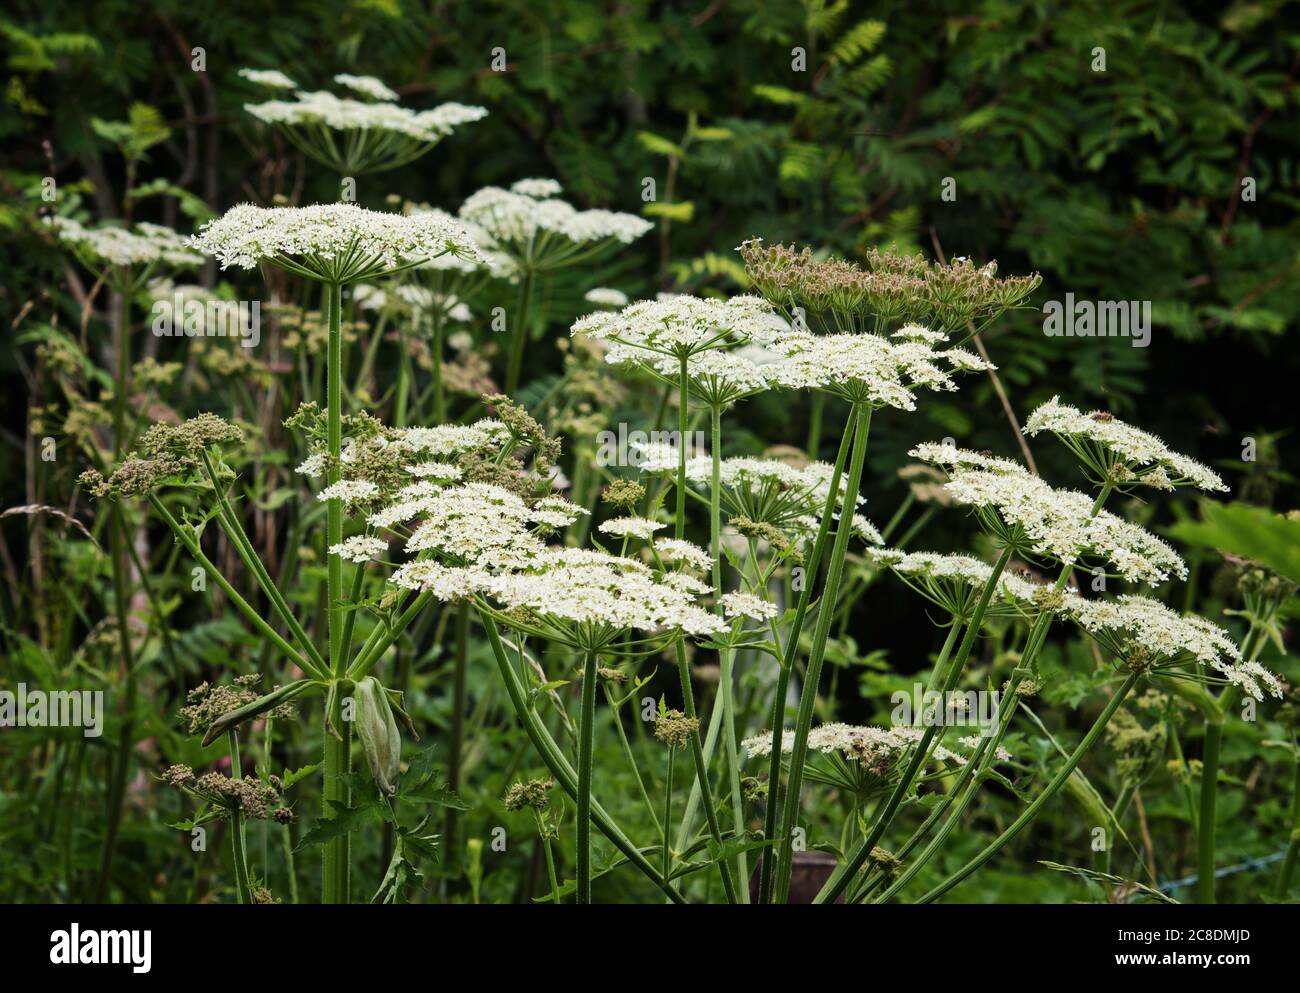 Giant Cow Parsley growing in the woodland, at a height of 1.7 to 1.8 metres Stock Photo